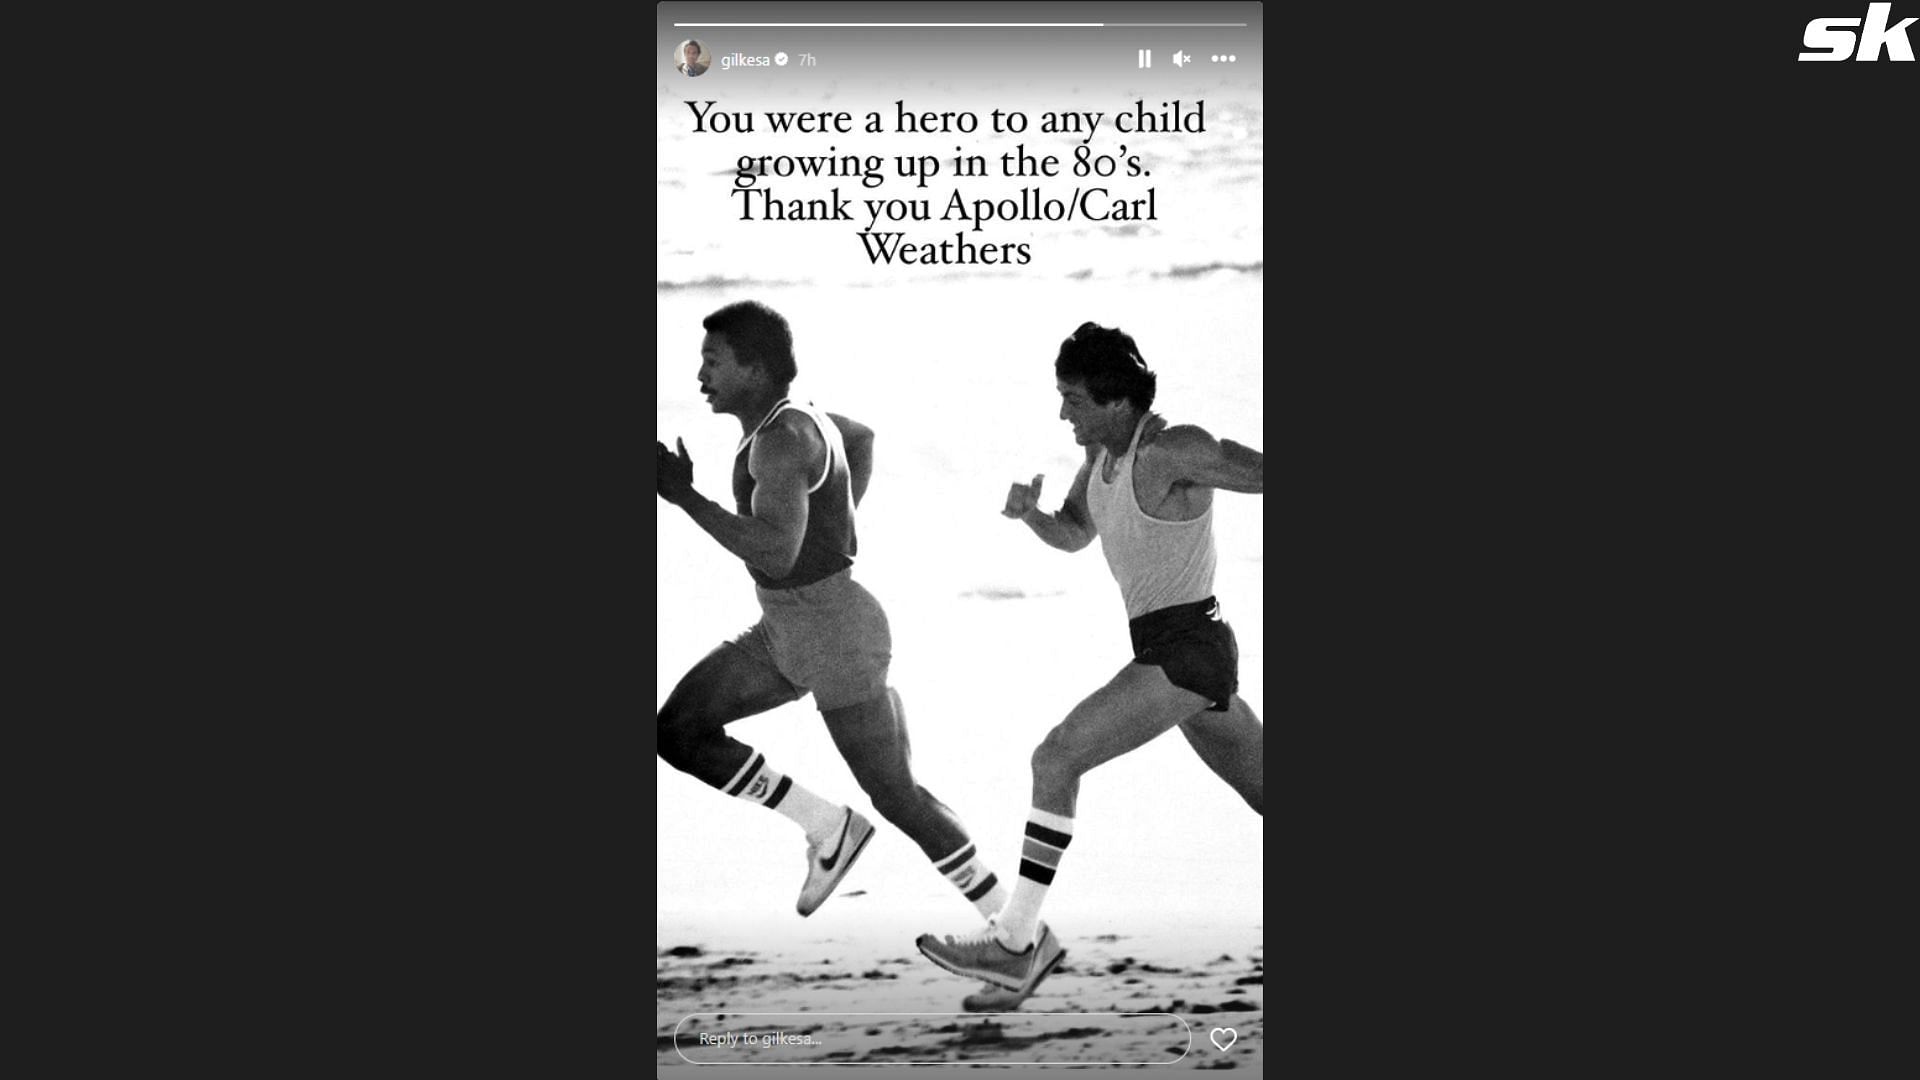 Alexander Gilkes pays tribute to Carl Weathers via his Instagram